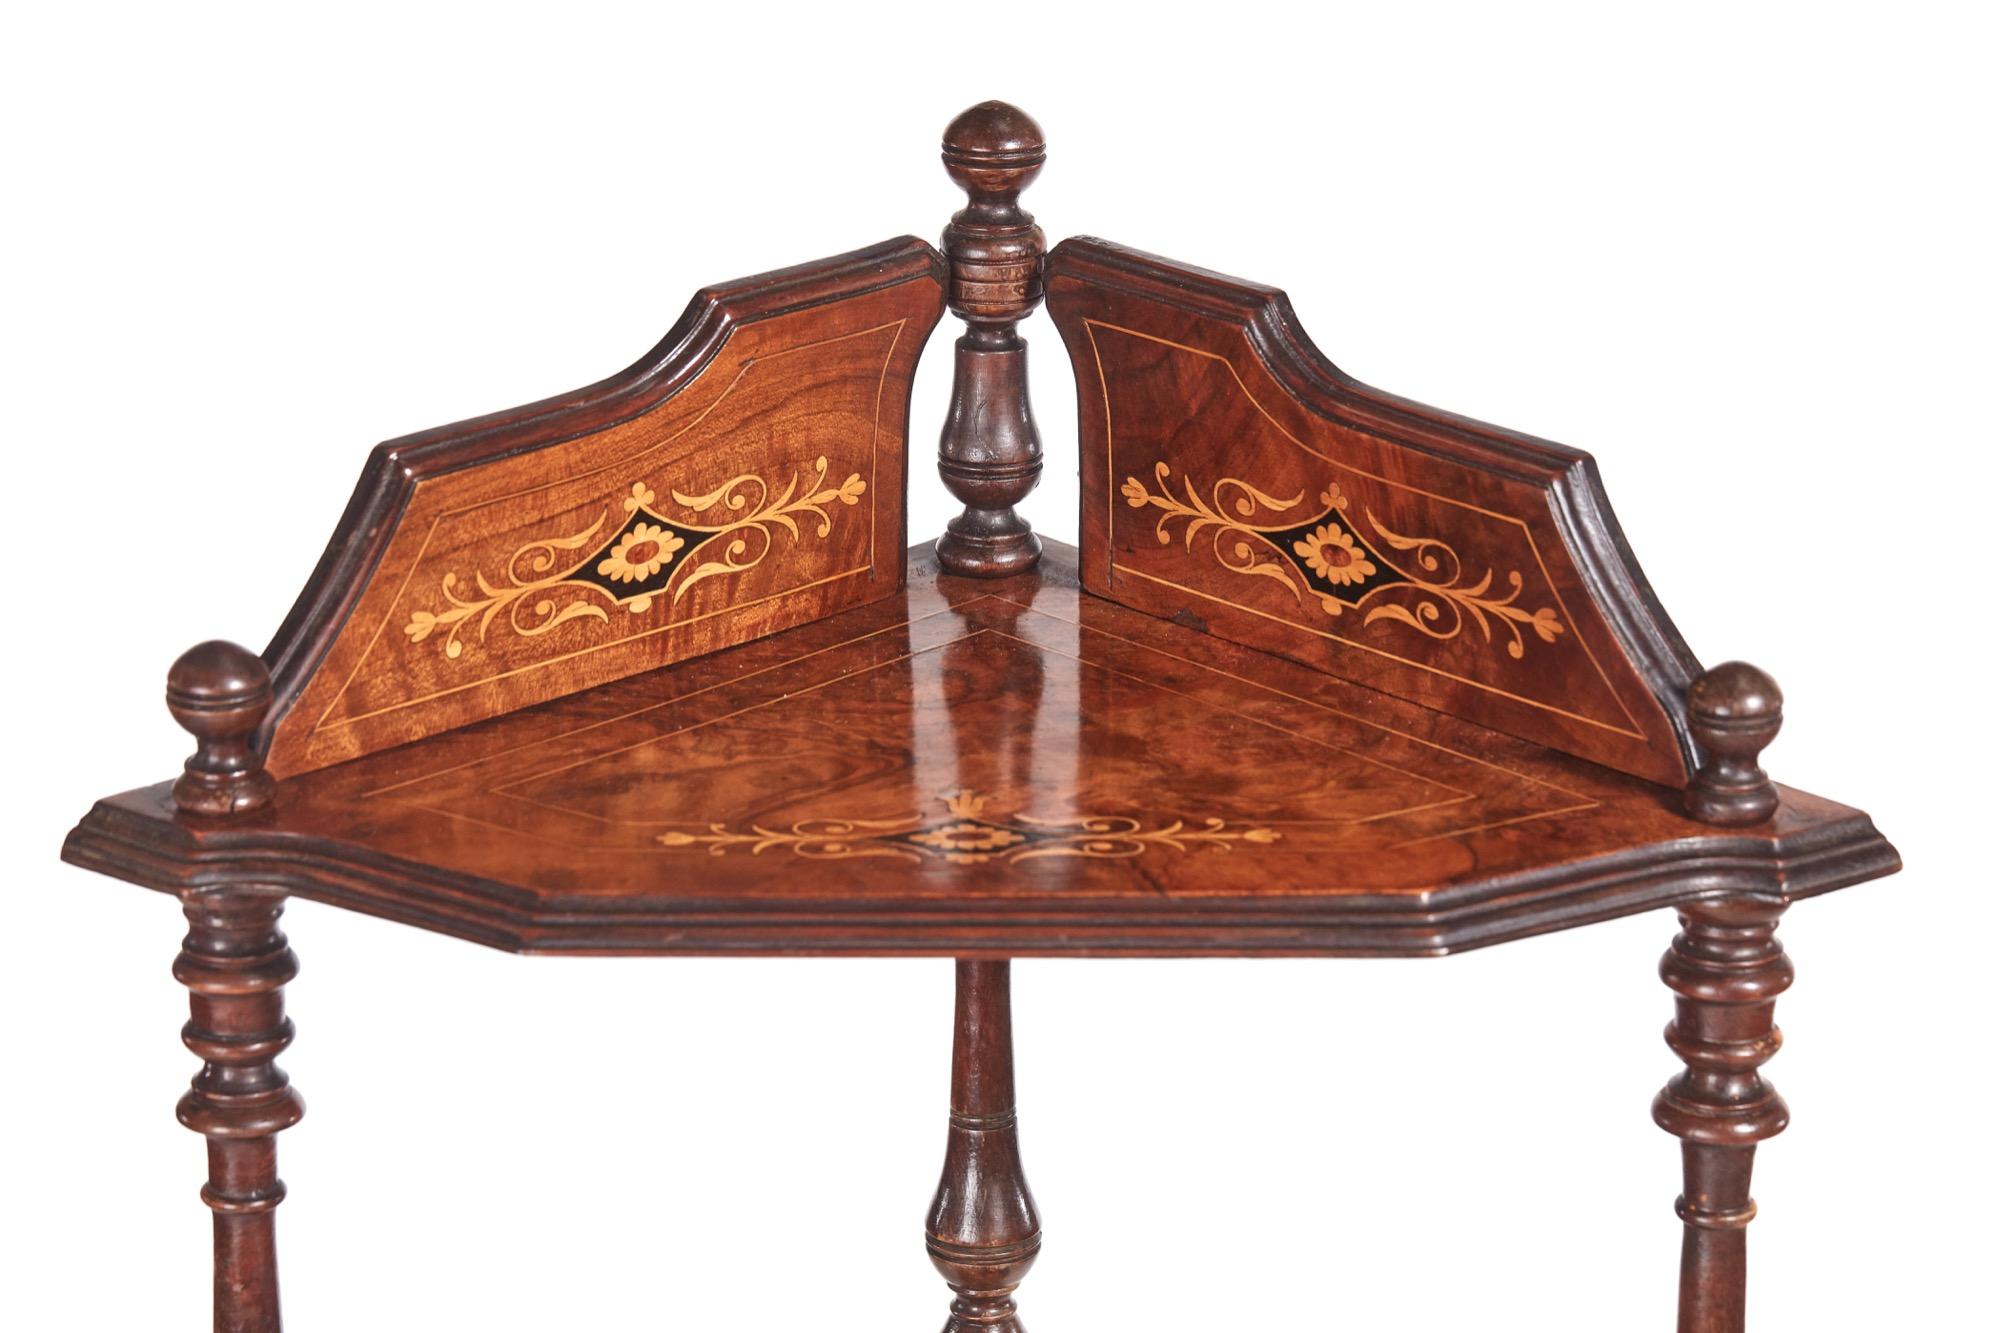 This is a quality 19th century Victorian antique inlaid burr walnut four-tier corner whatnot. It has a pretty shaped inlaid gallery back and three finials with a lovely burr walnut inlaid top, three inlaid burr walnut under-tiers supported by shaped